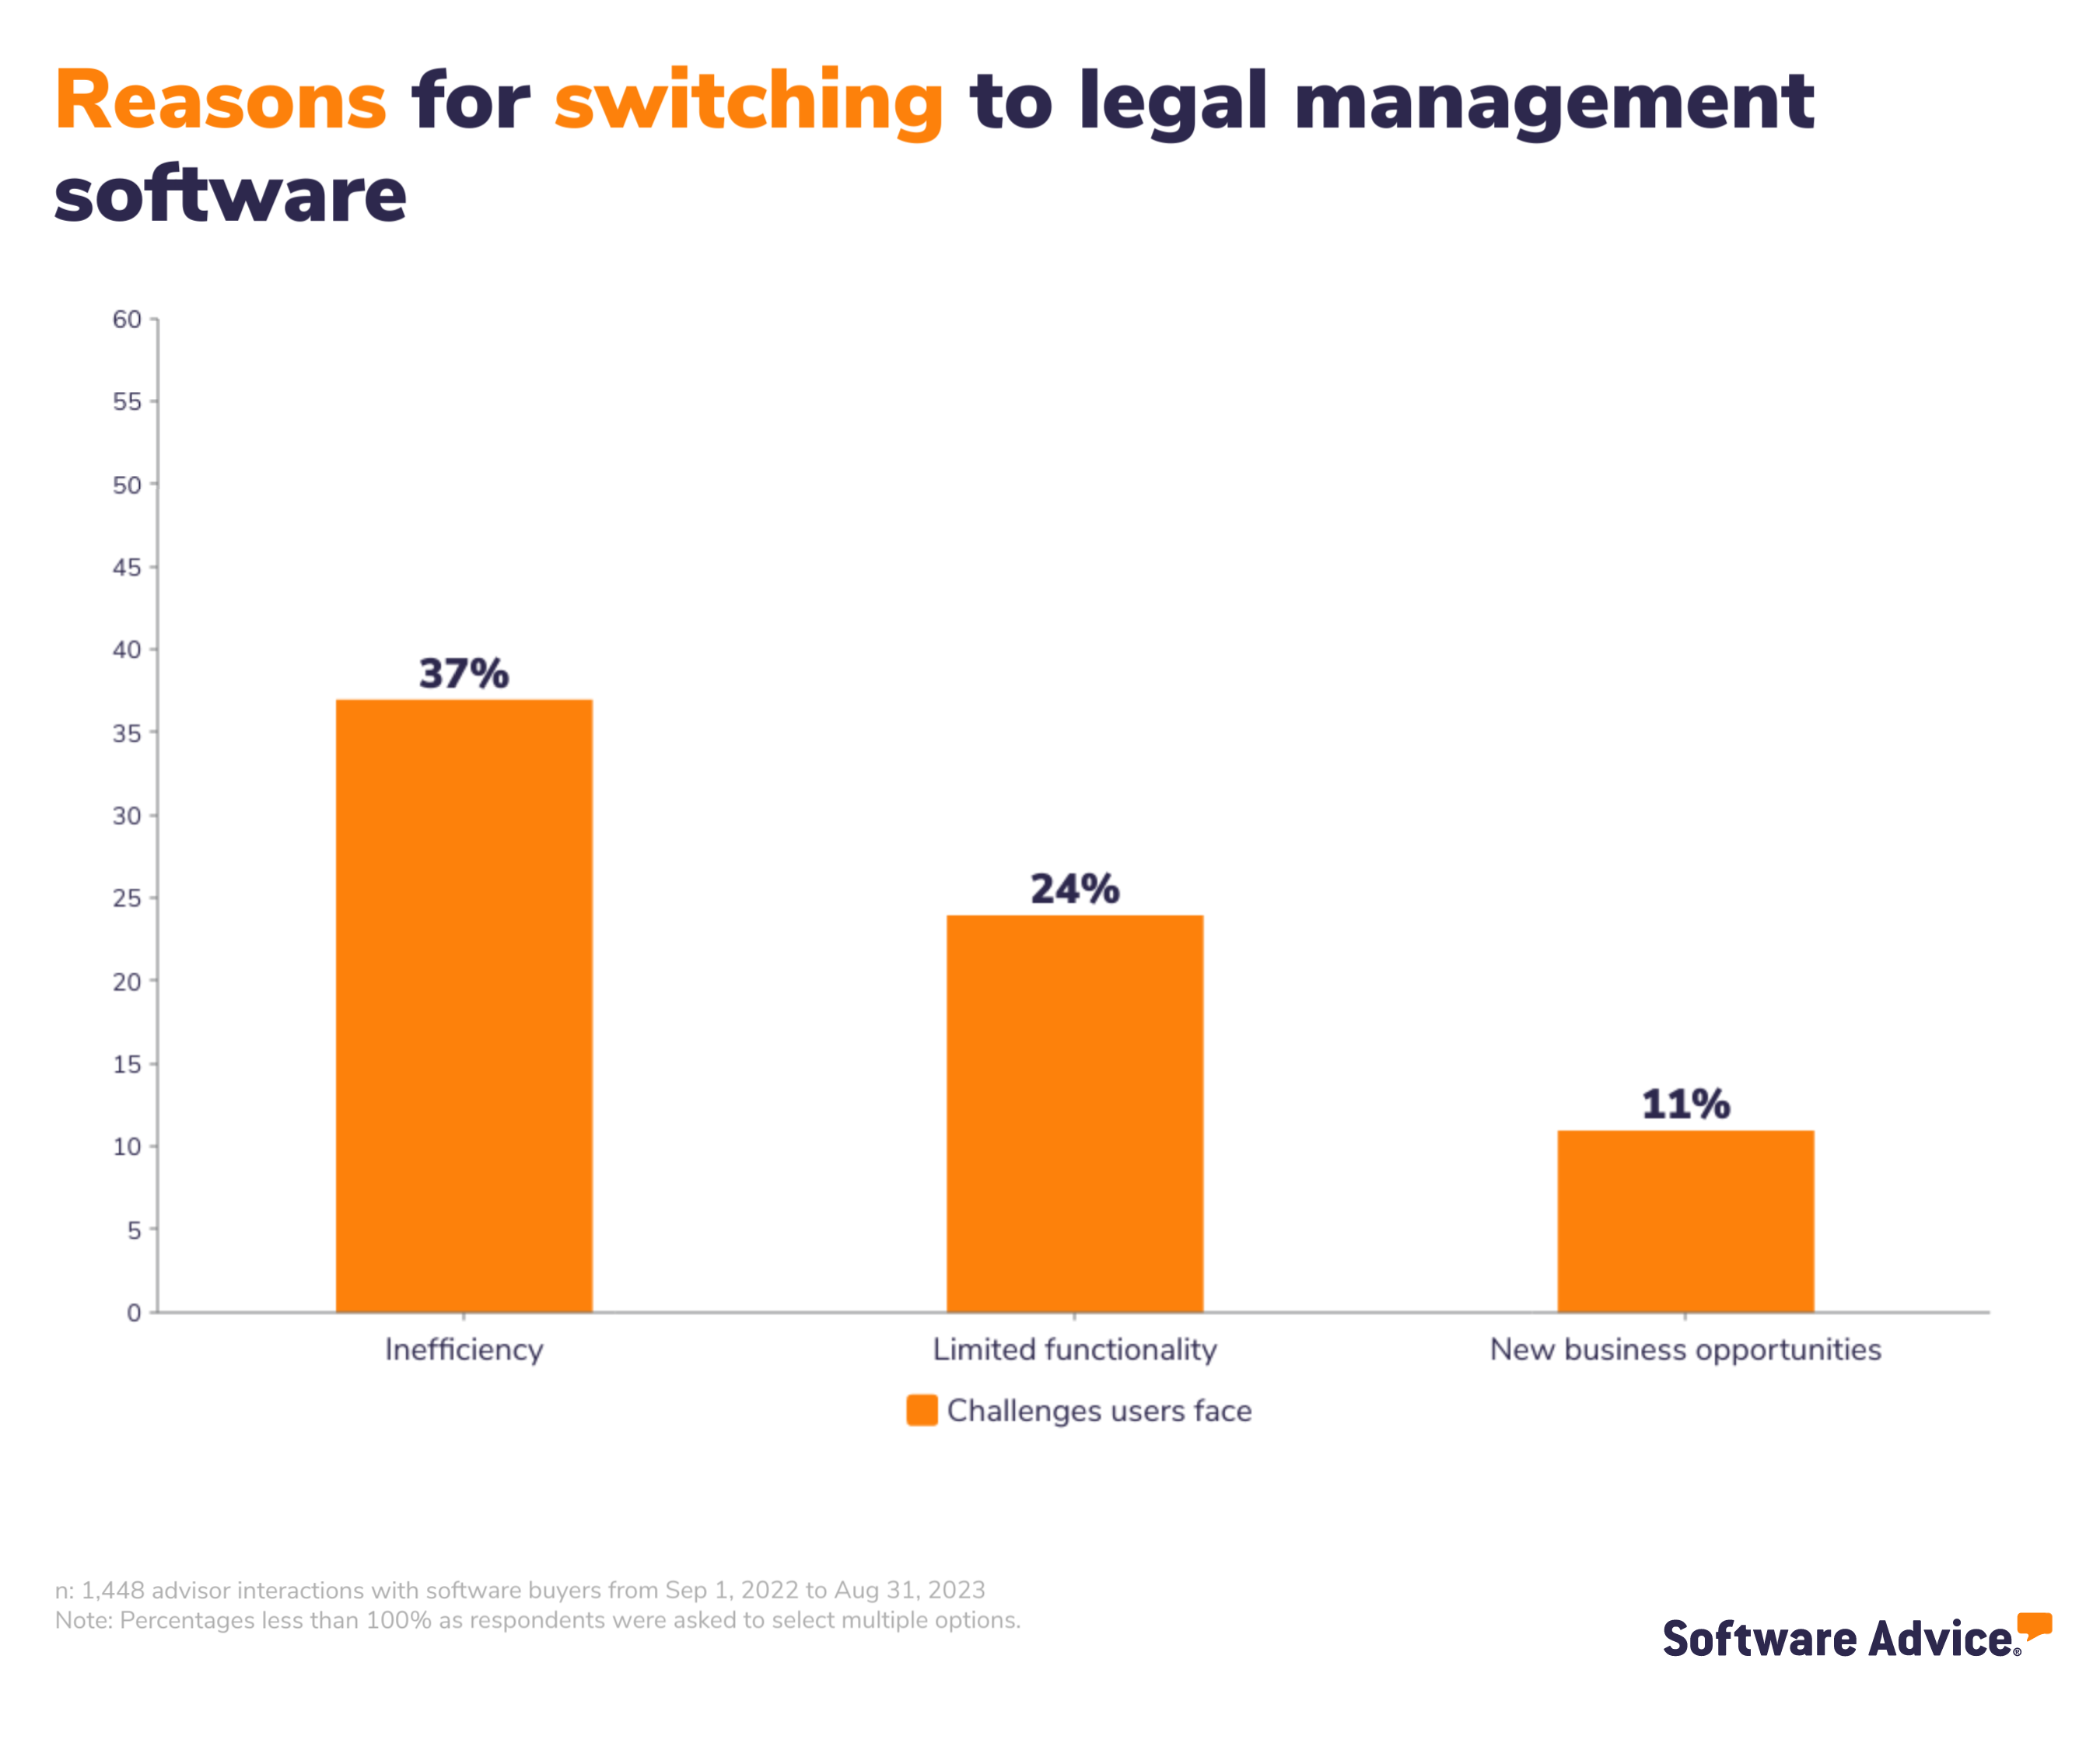 SA graphic showing reasons for switching to legal management software